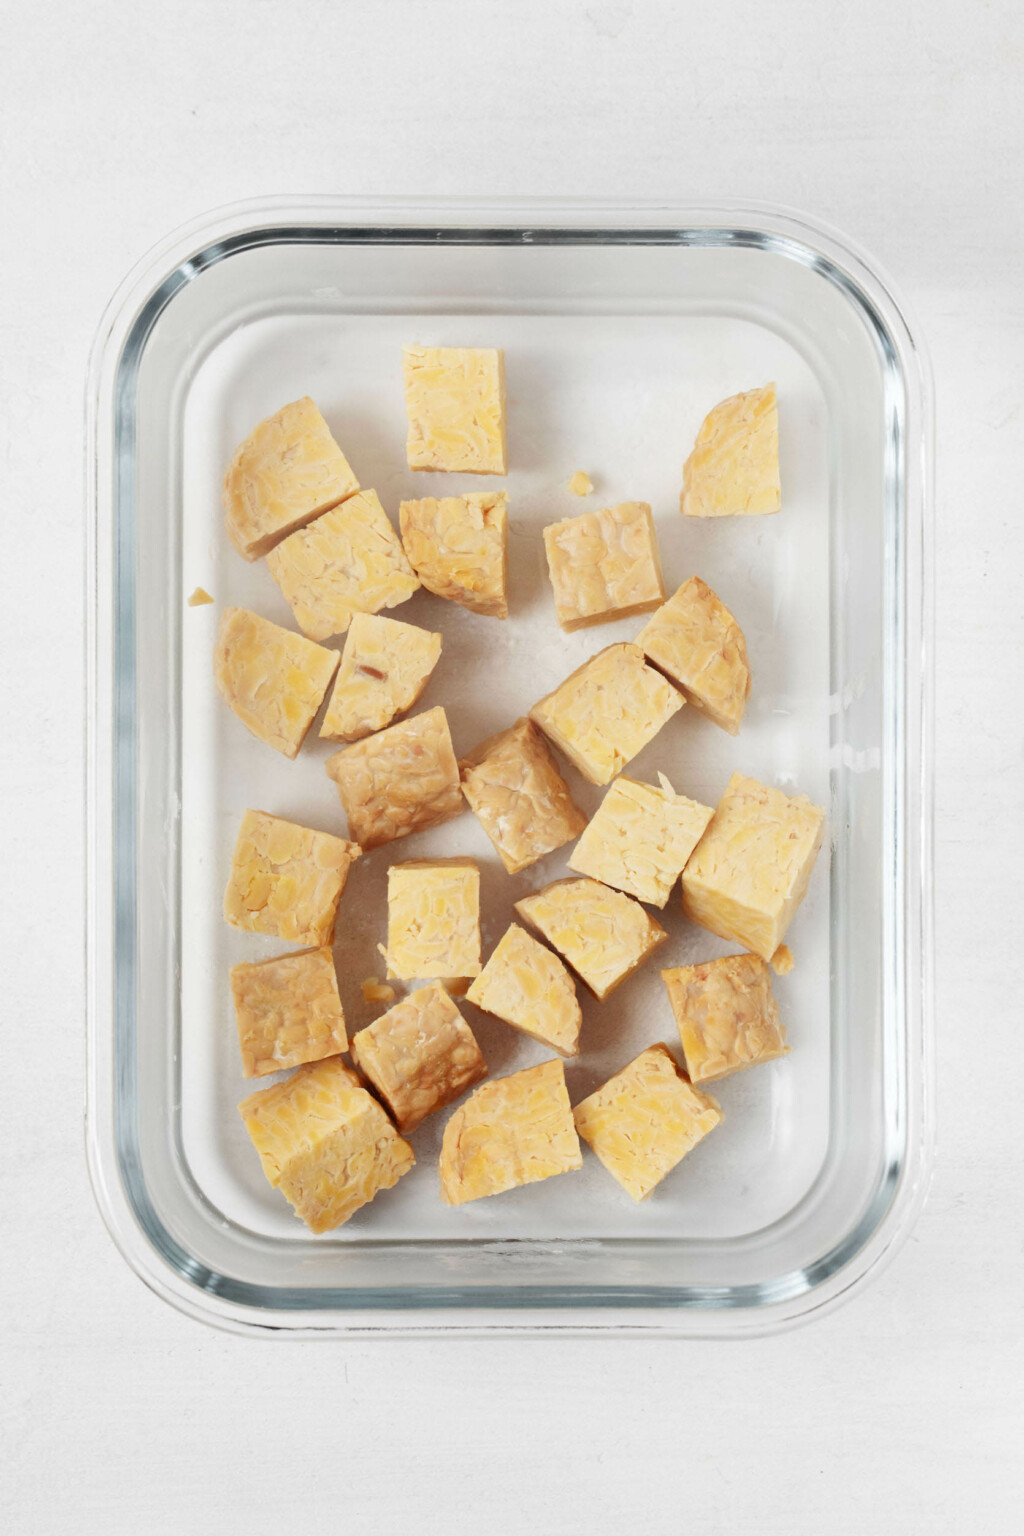 Cubed tempeh is resting in a clear, rectangular storage dish.